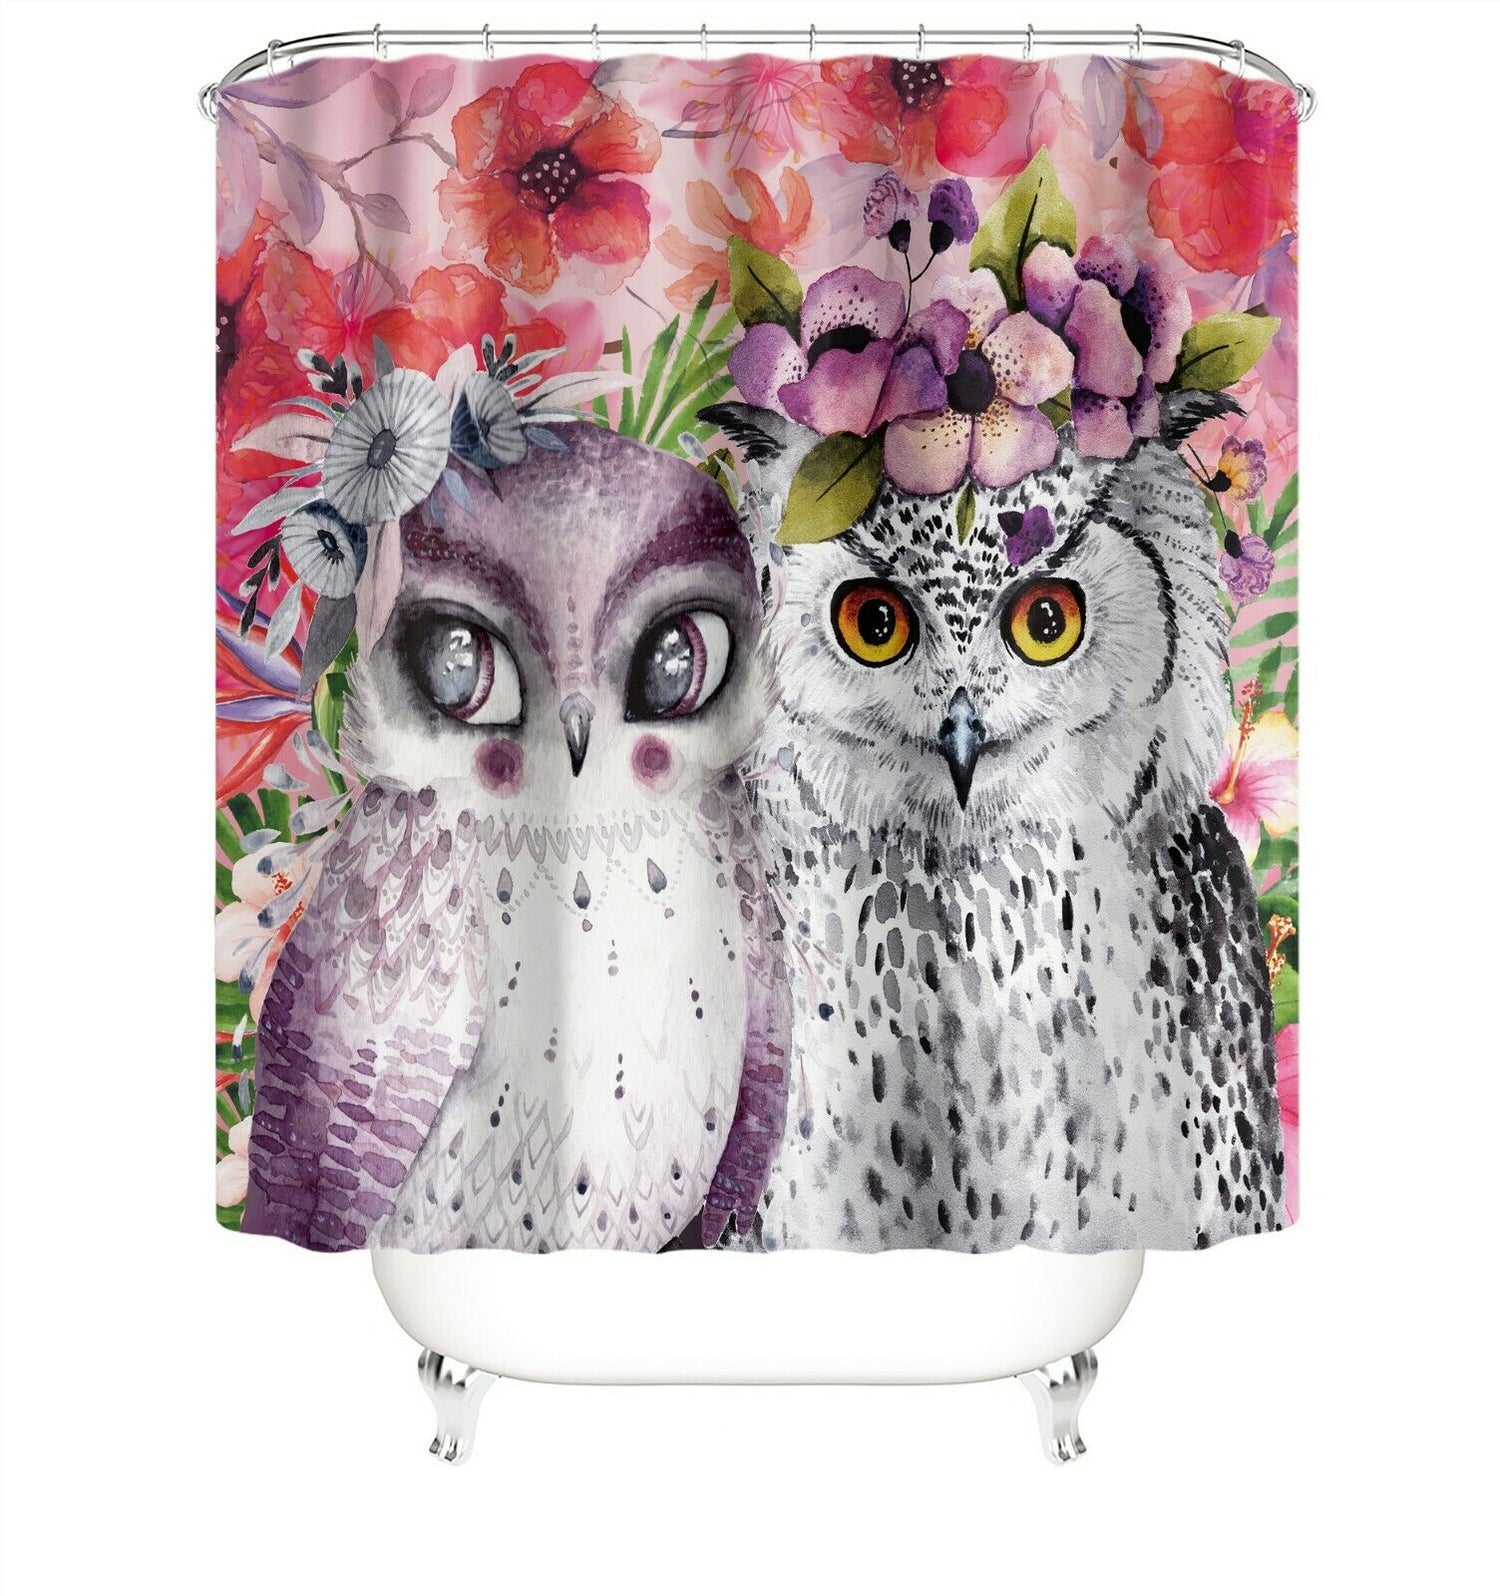 Owl Shower Curtain Bathroom Rug Set Thick Bath Mat Non-Slip Toilet Lid Cover-180×180cm Shower Curtain Only-Free Shipping at meselling99